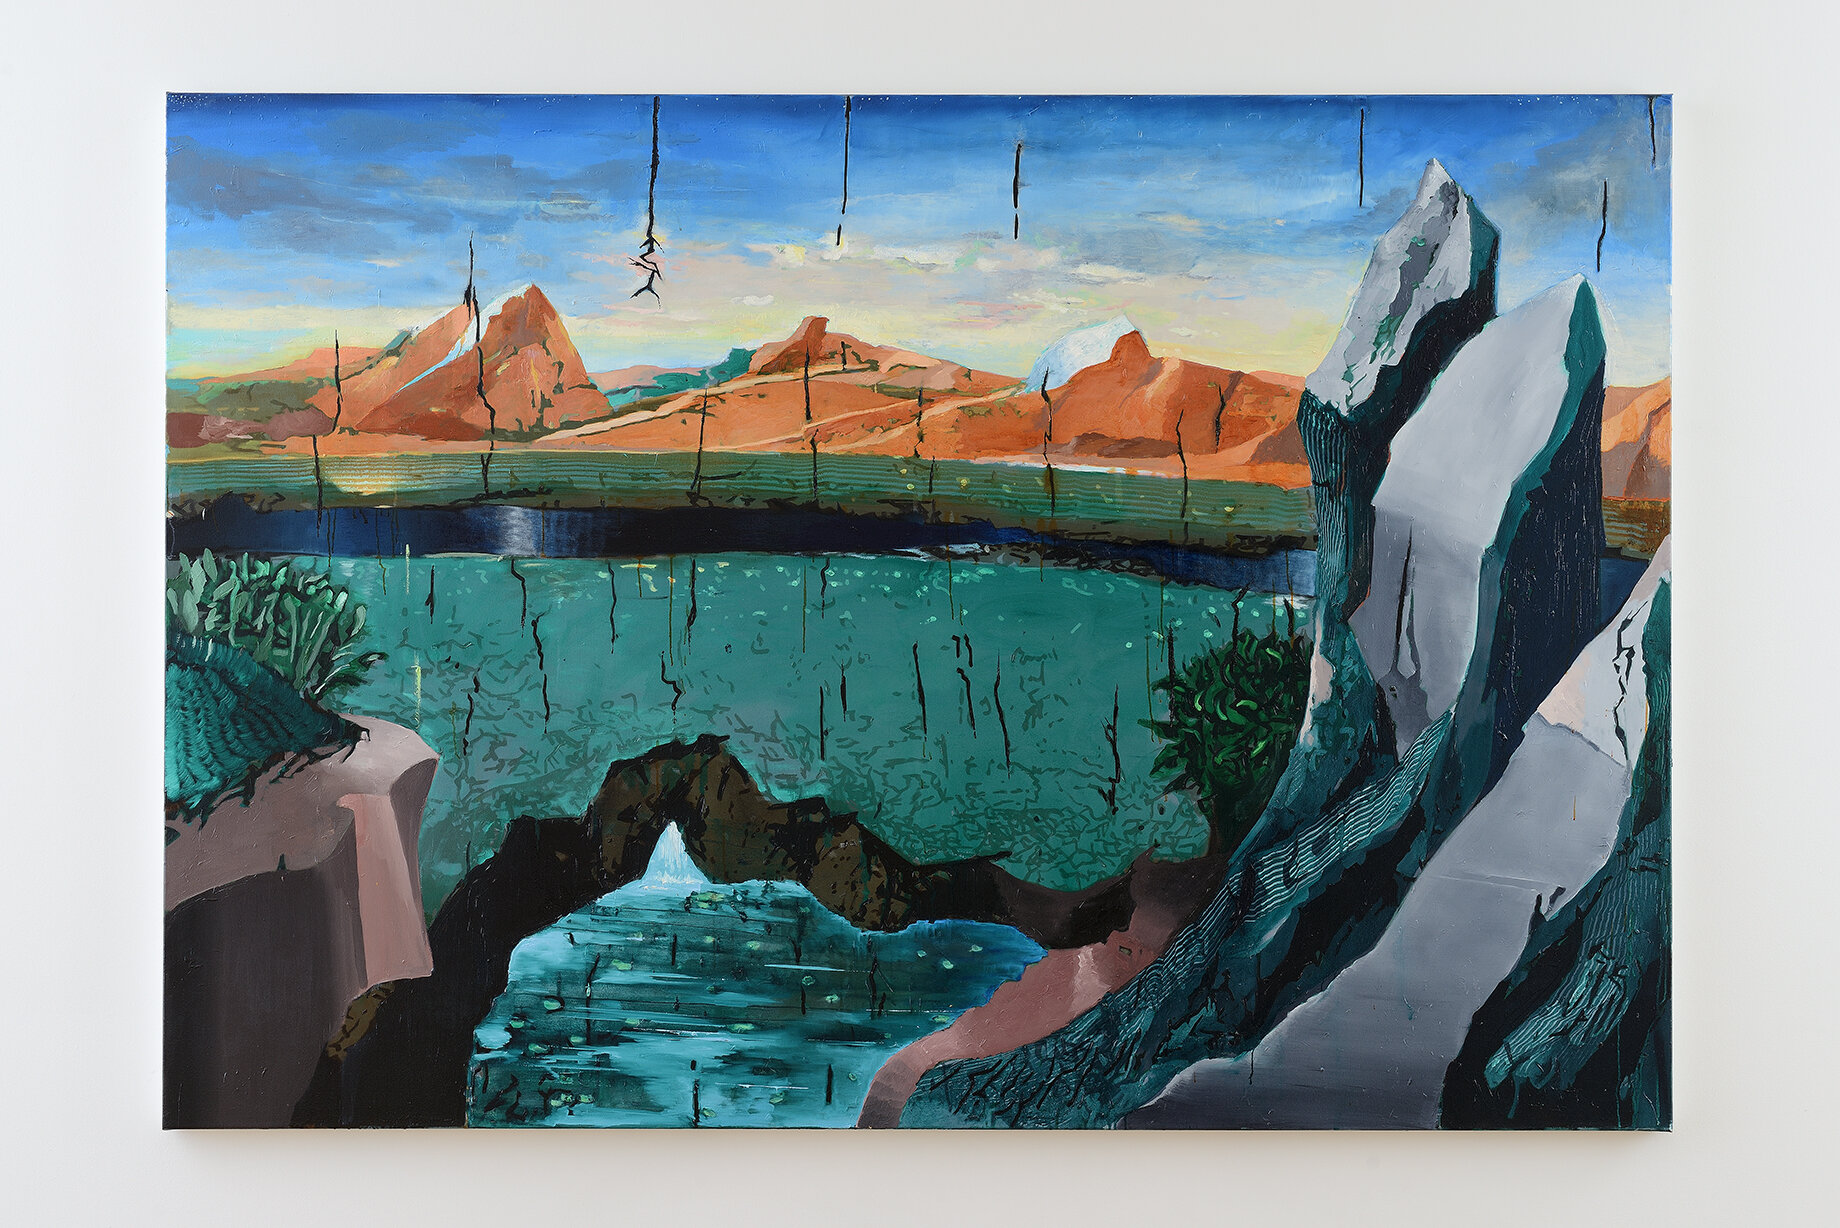   Valley  (2020),    oil on canvas, 180x260 cm       